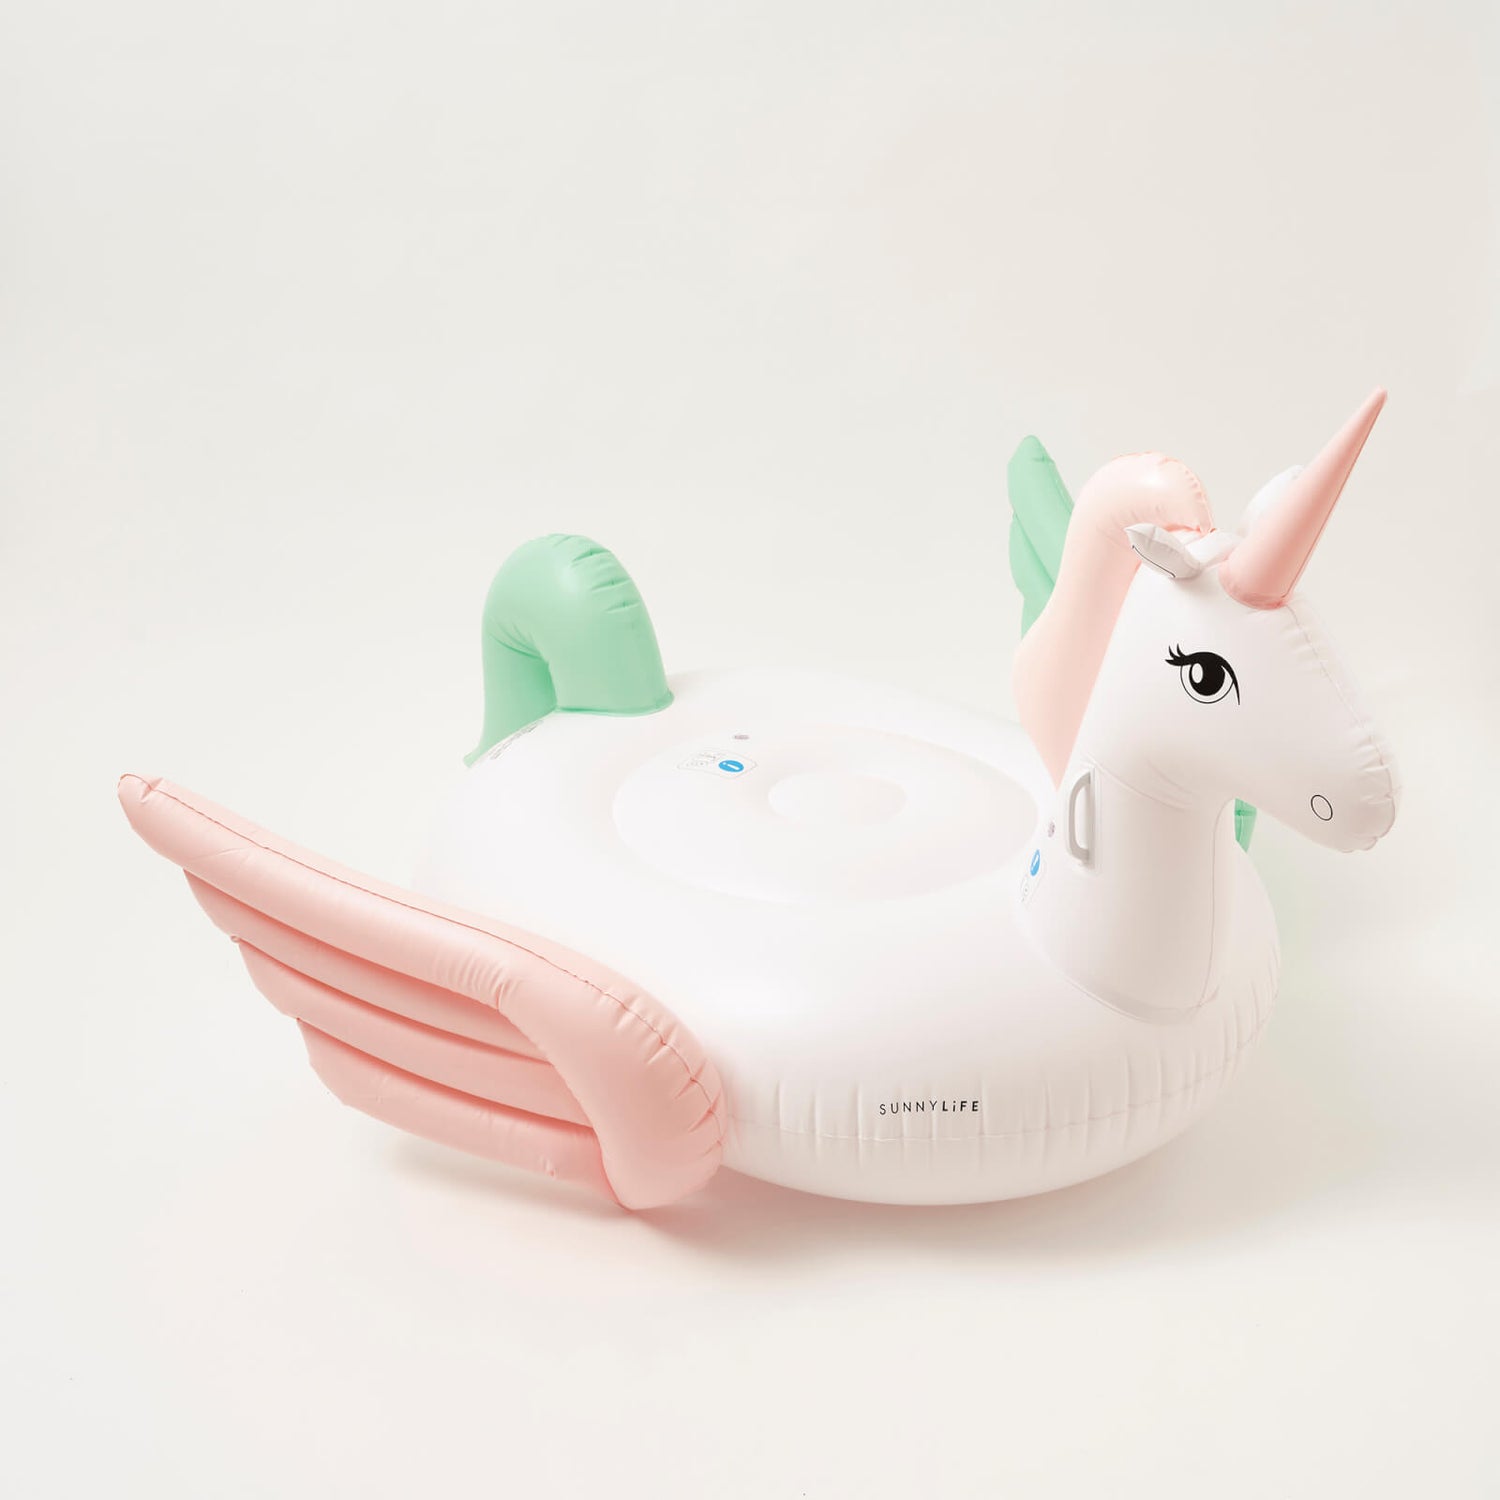 Sunnylife Luxe Ride On Unicorn Float - Coral Ombre